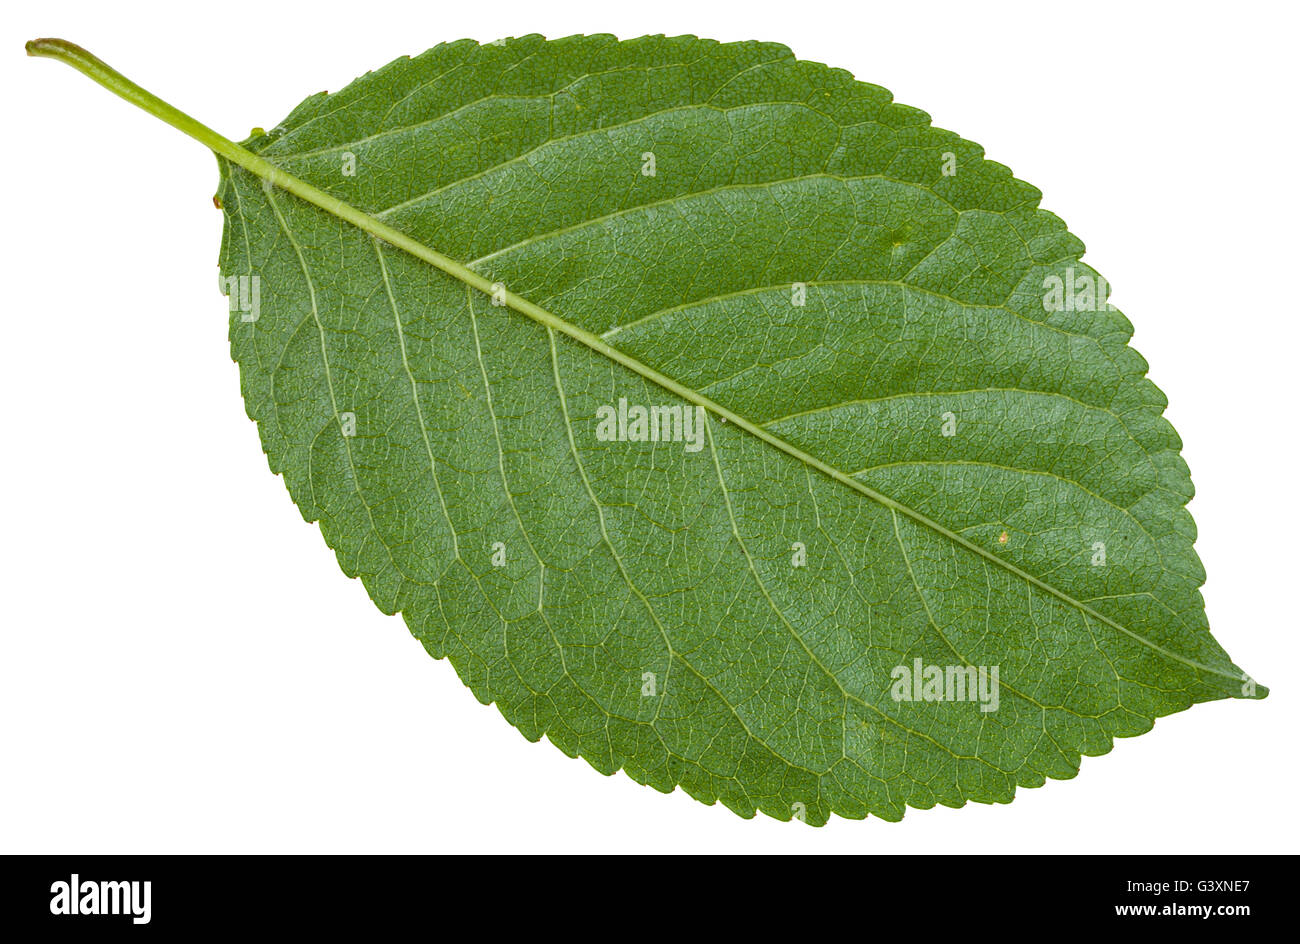 back side of green leaf of wild cherry tree (Prunus cerasus) isolated on white background Stock Photo